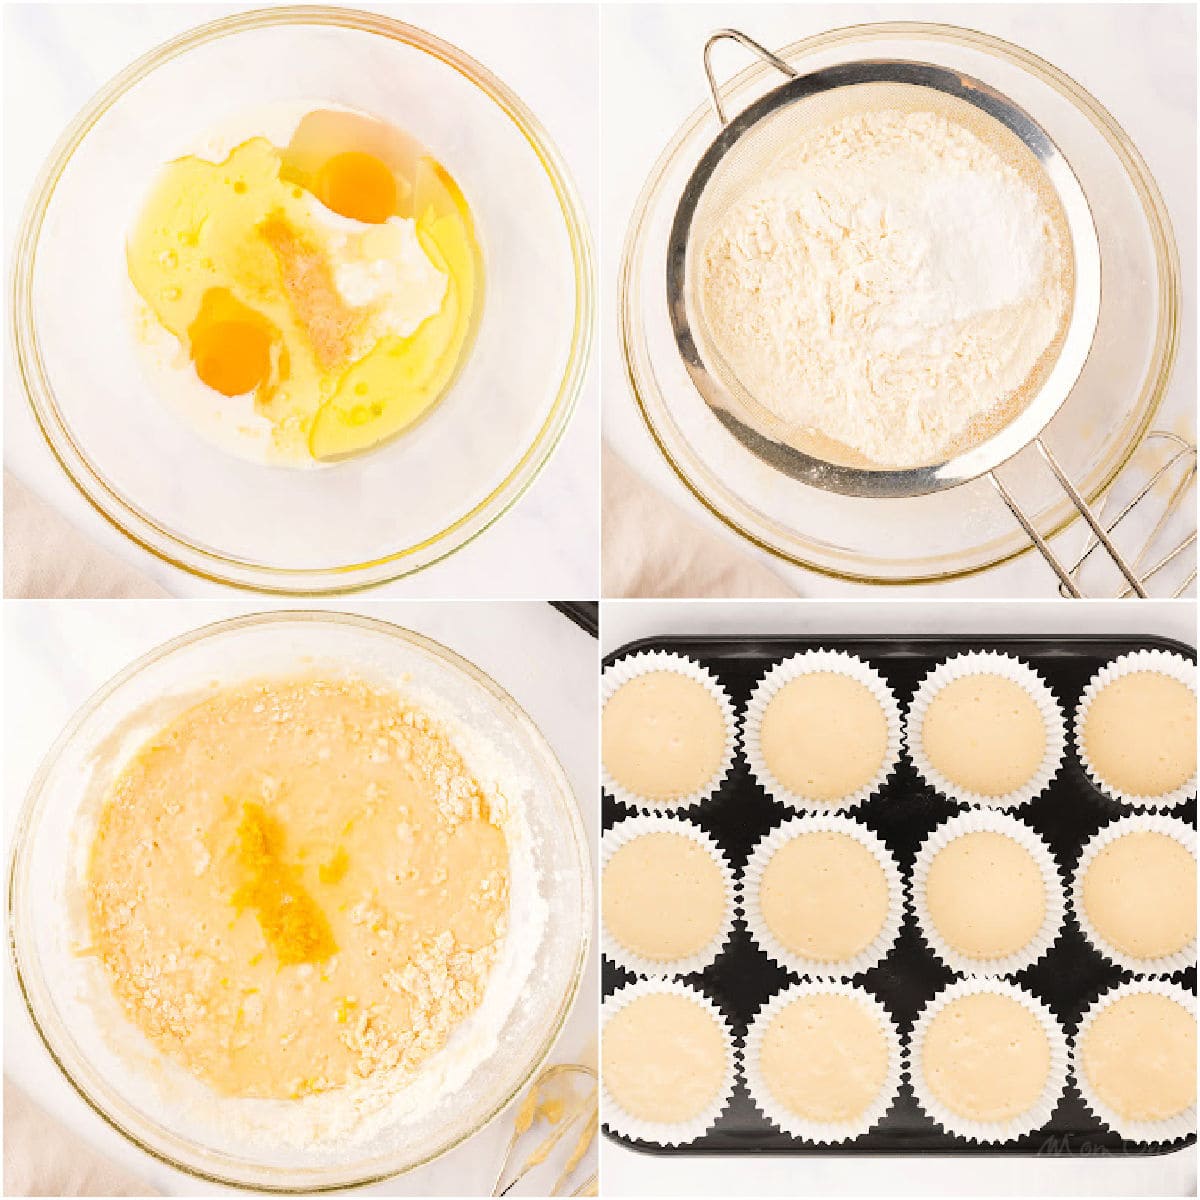 four image collage showing how to make lemon cupcakes step by step.